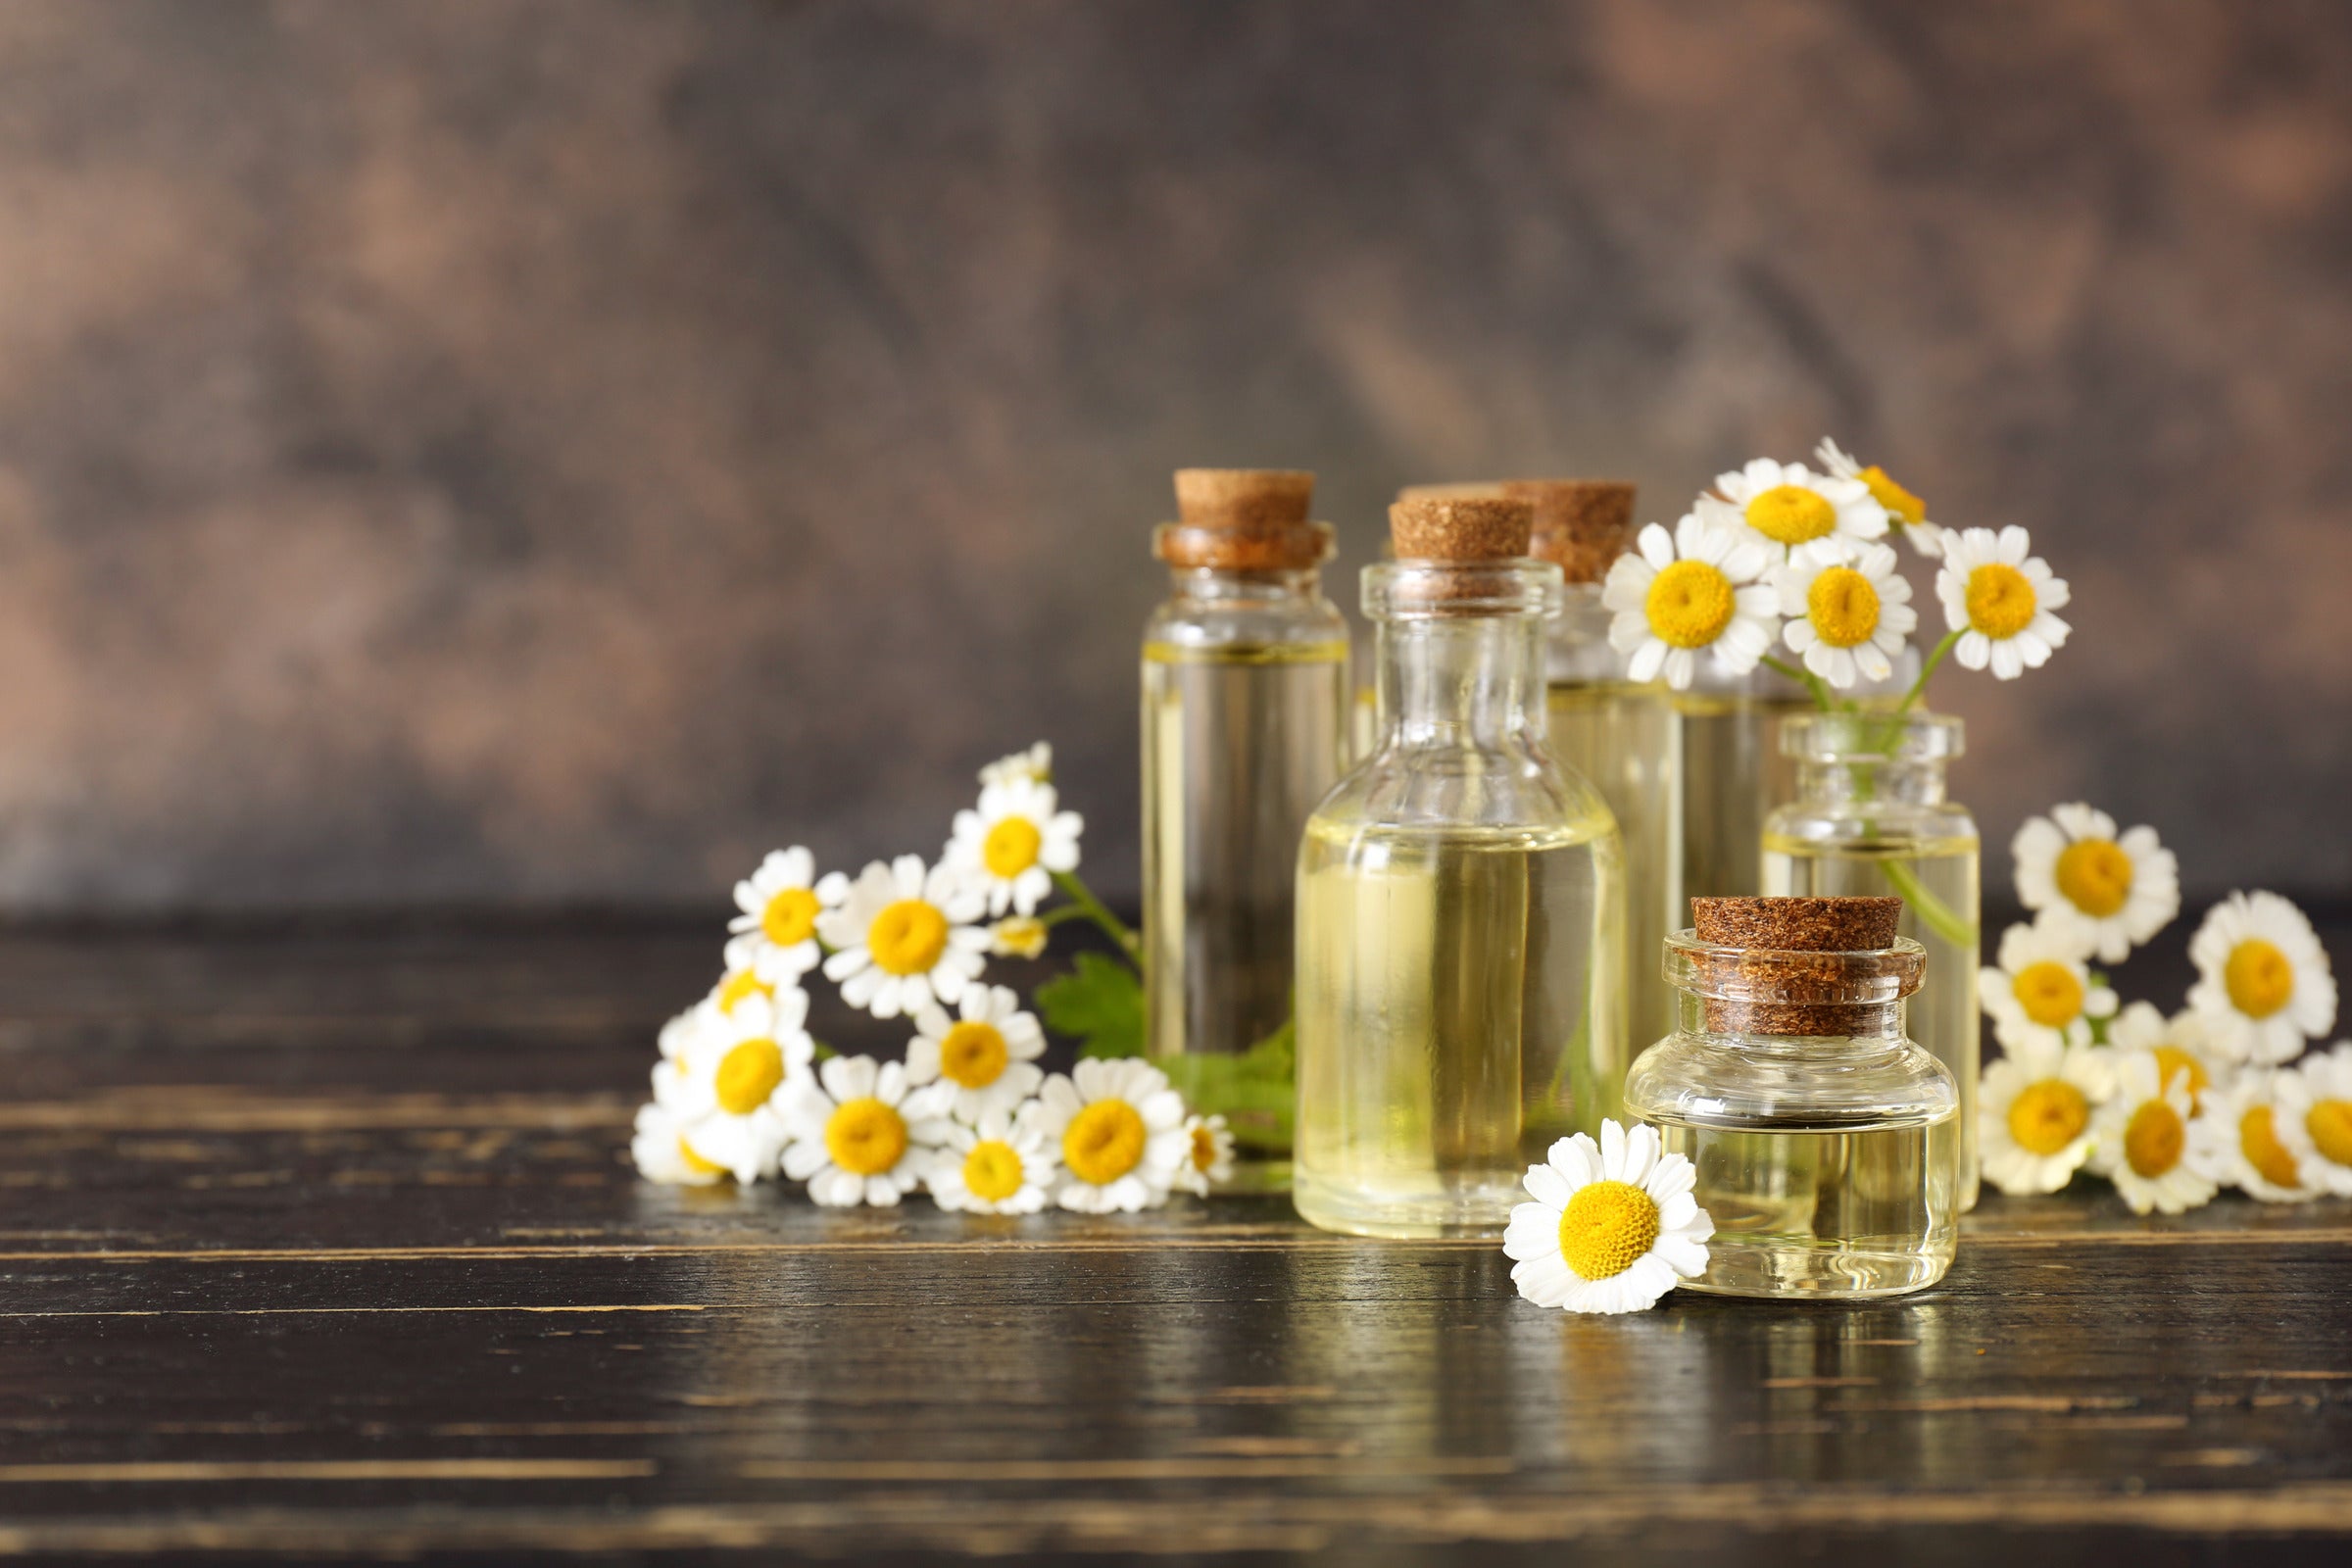 Irritation from bumpy skin with German Chamomile